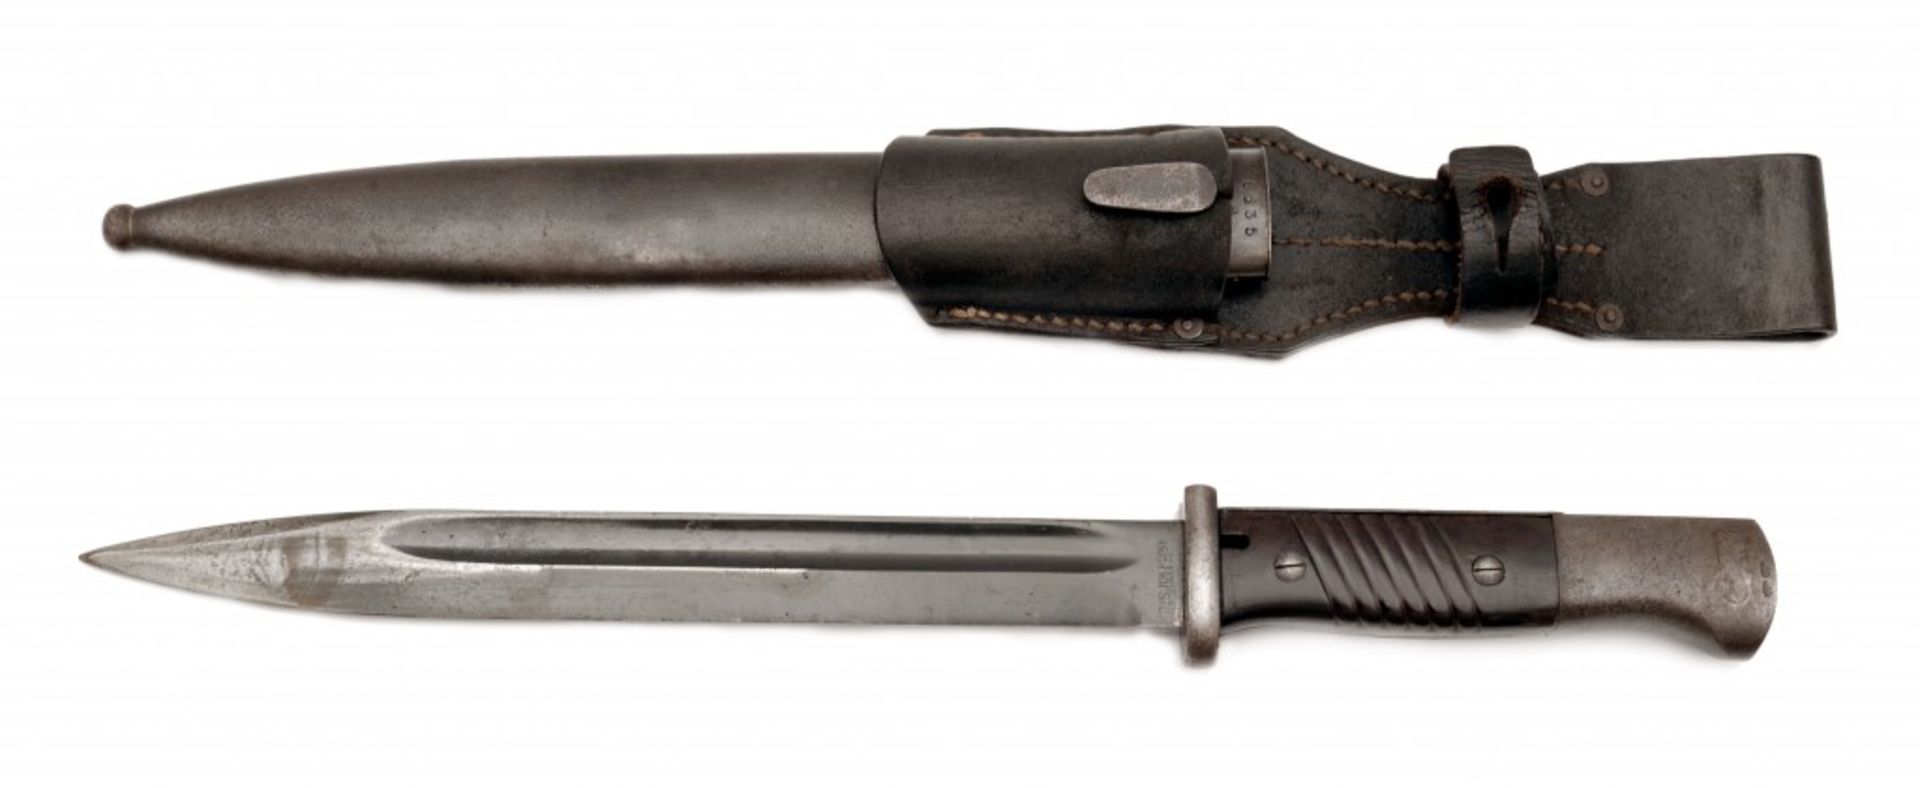 K98 Bayonet by E. & F. Hörster with Scabbard and Frog